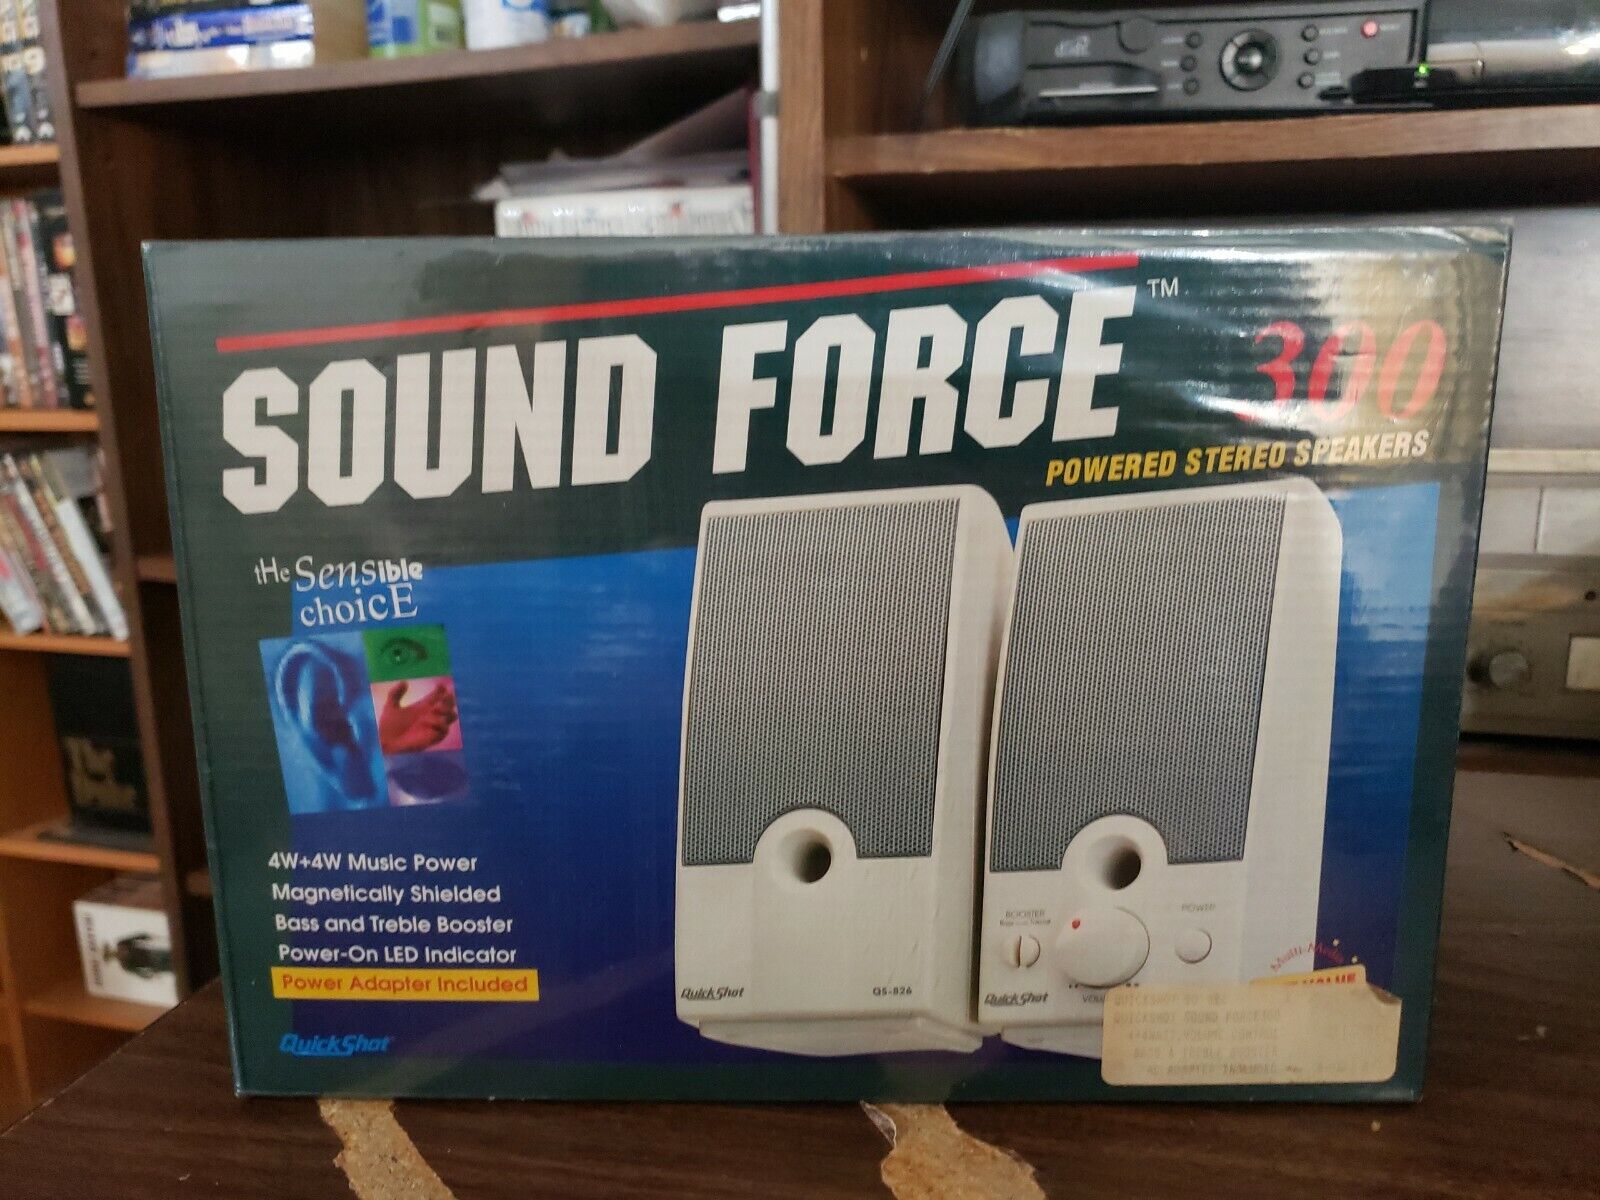 Sound Force 300 Powered Stereo Speakers BRAND NEW